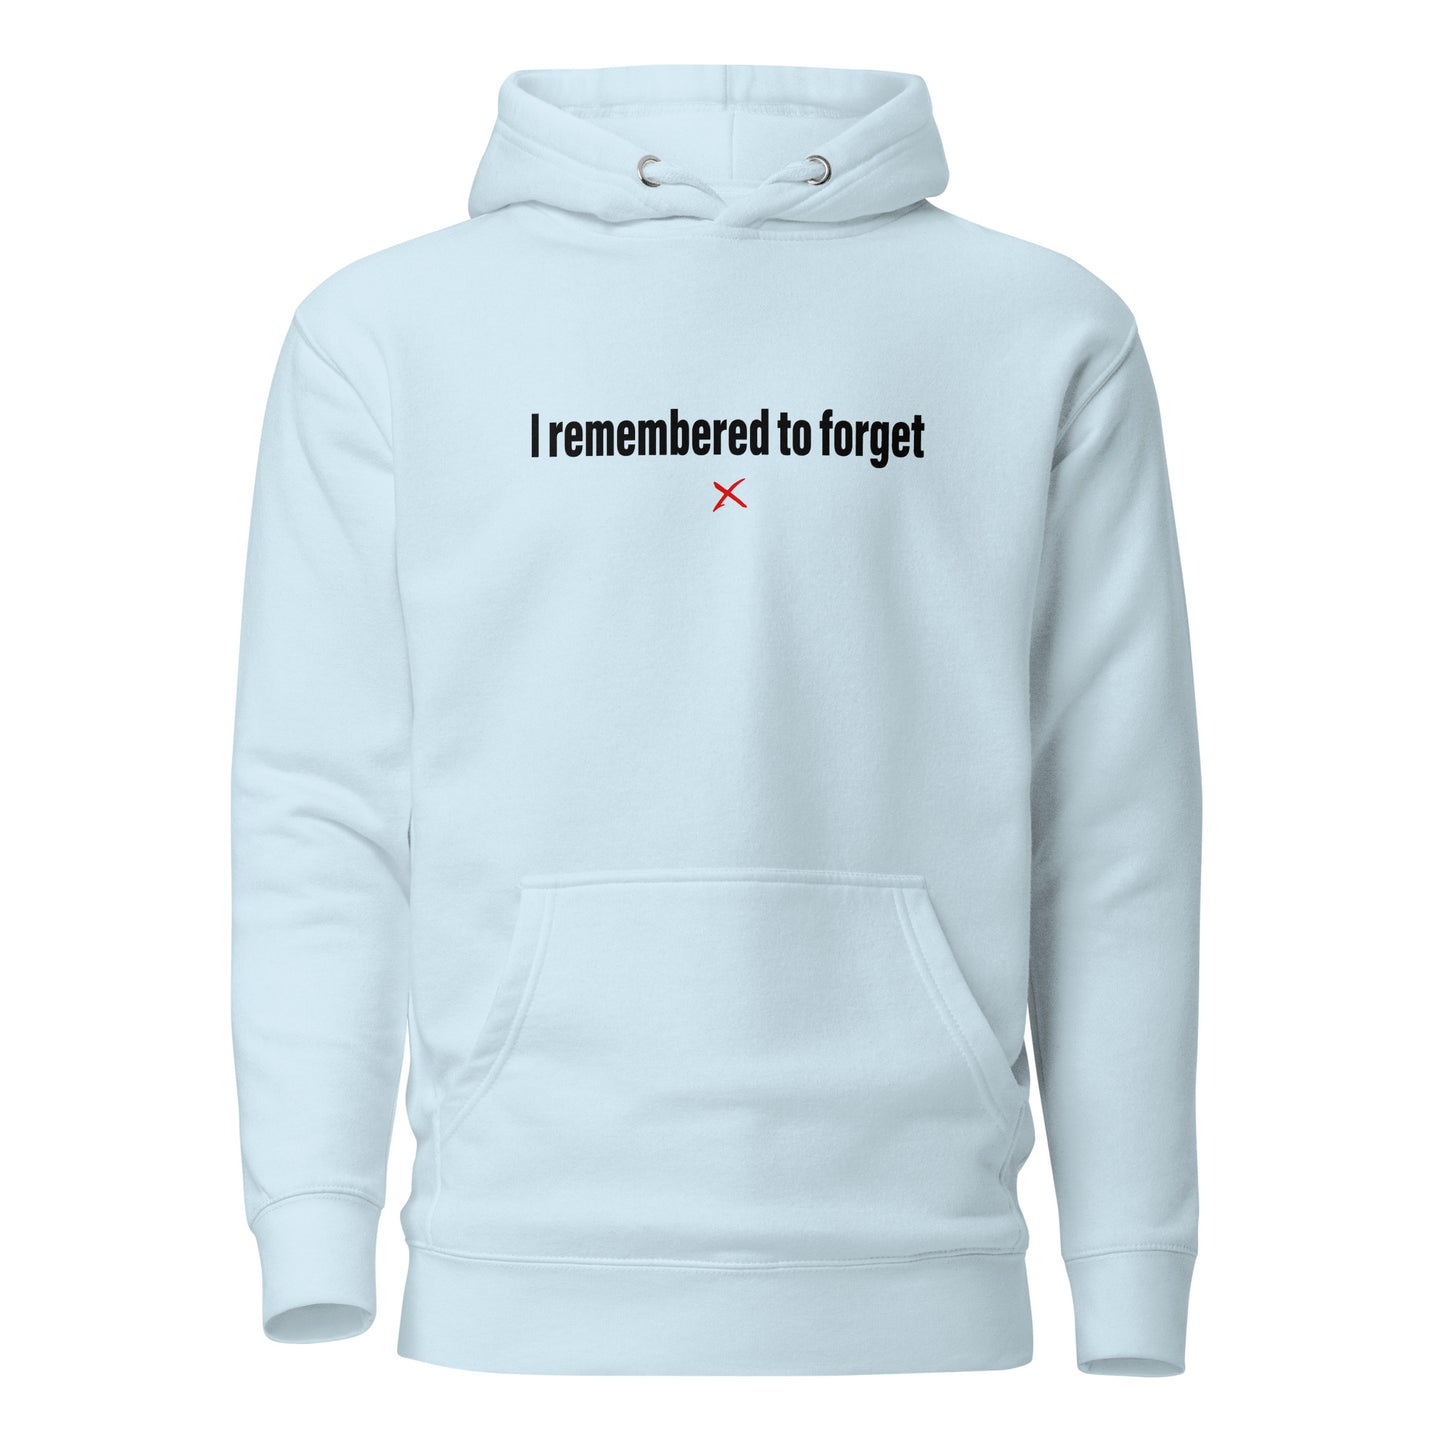 I remembered to forget - Hoodie